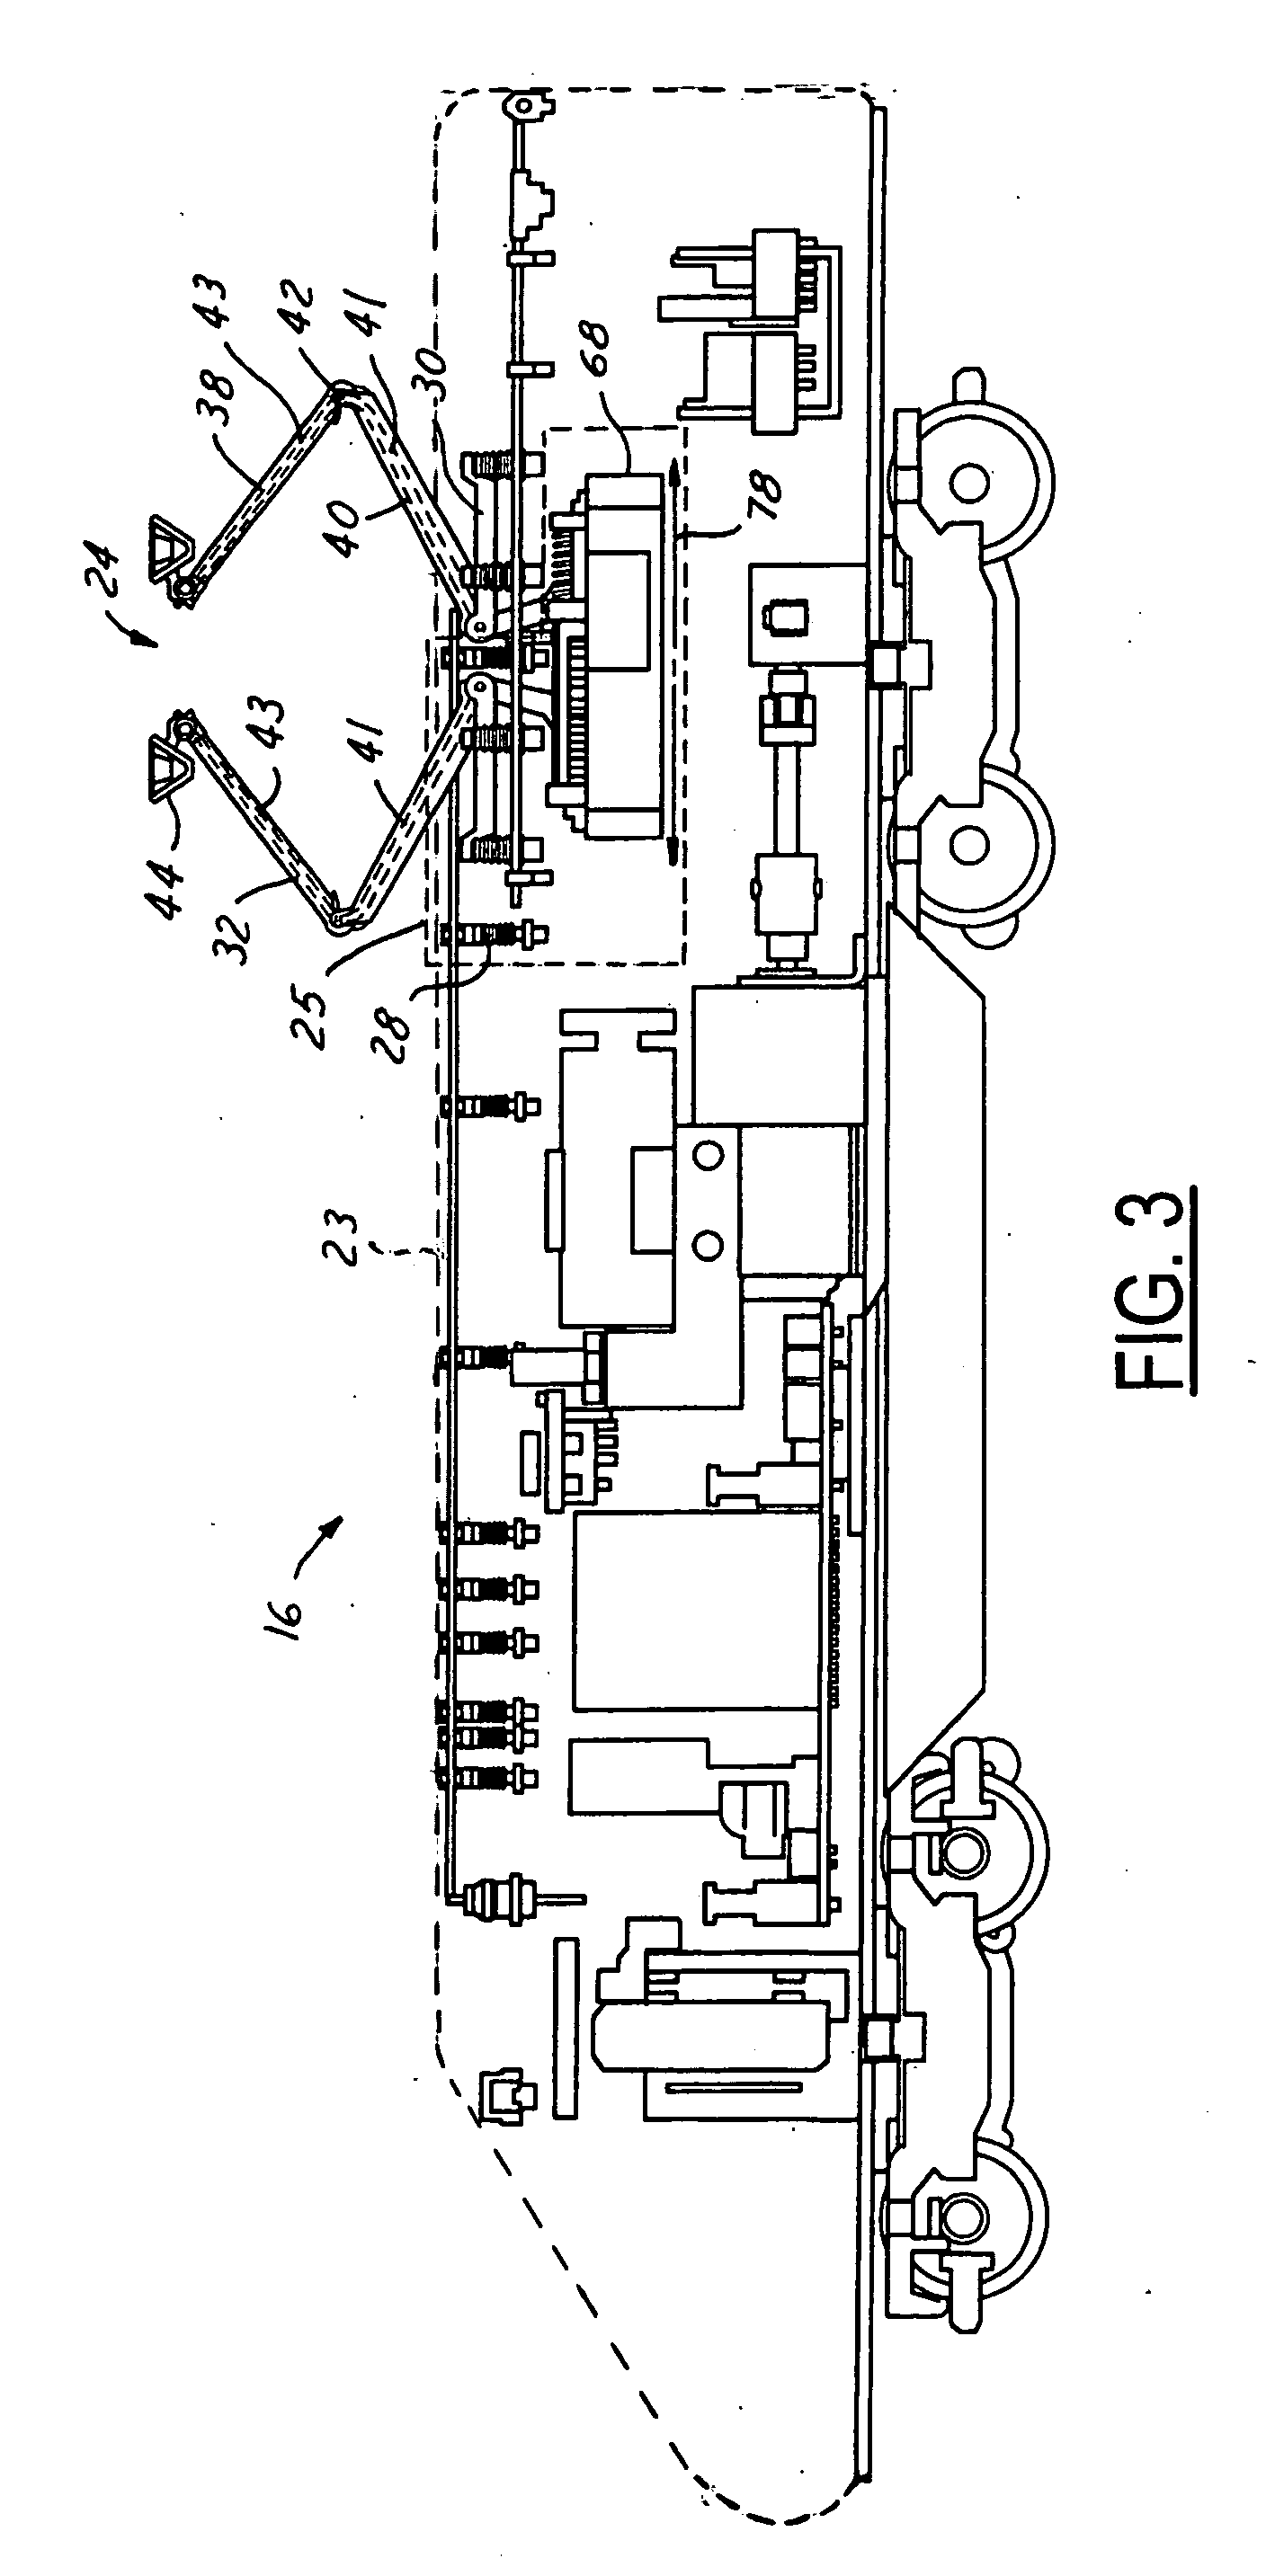 Model vehicle with automated pantograph